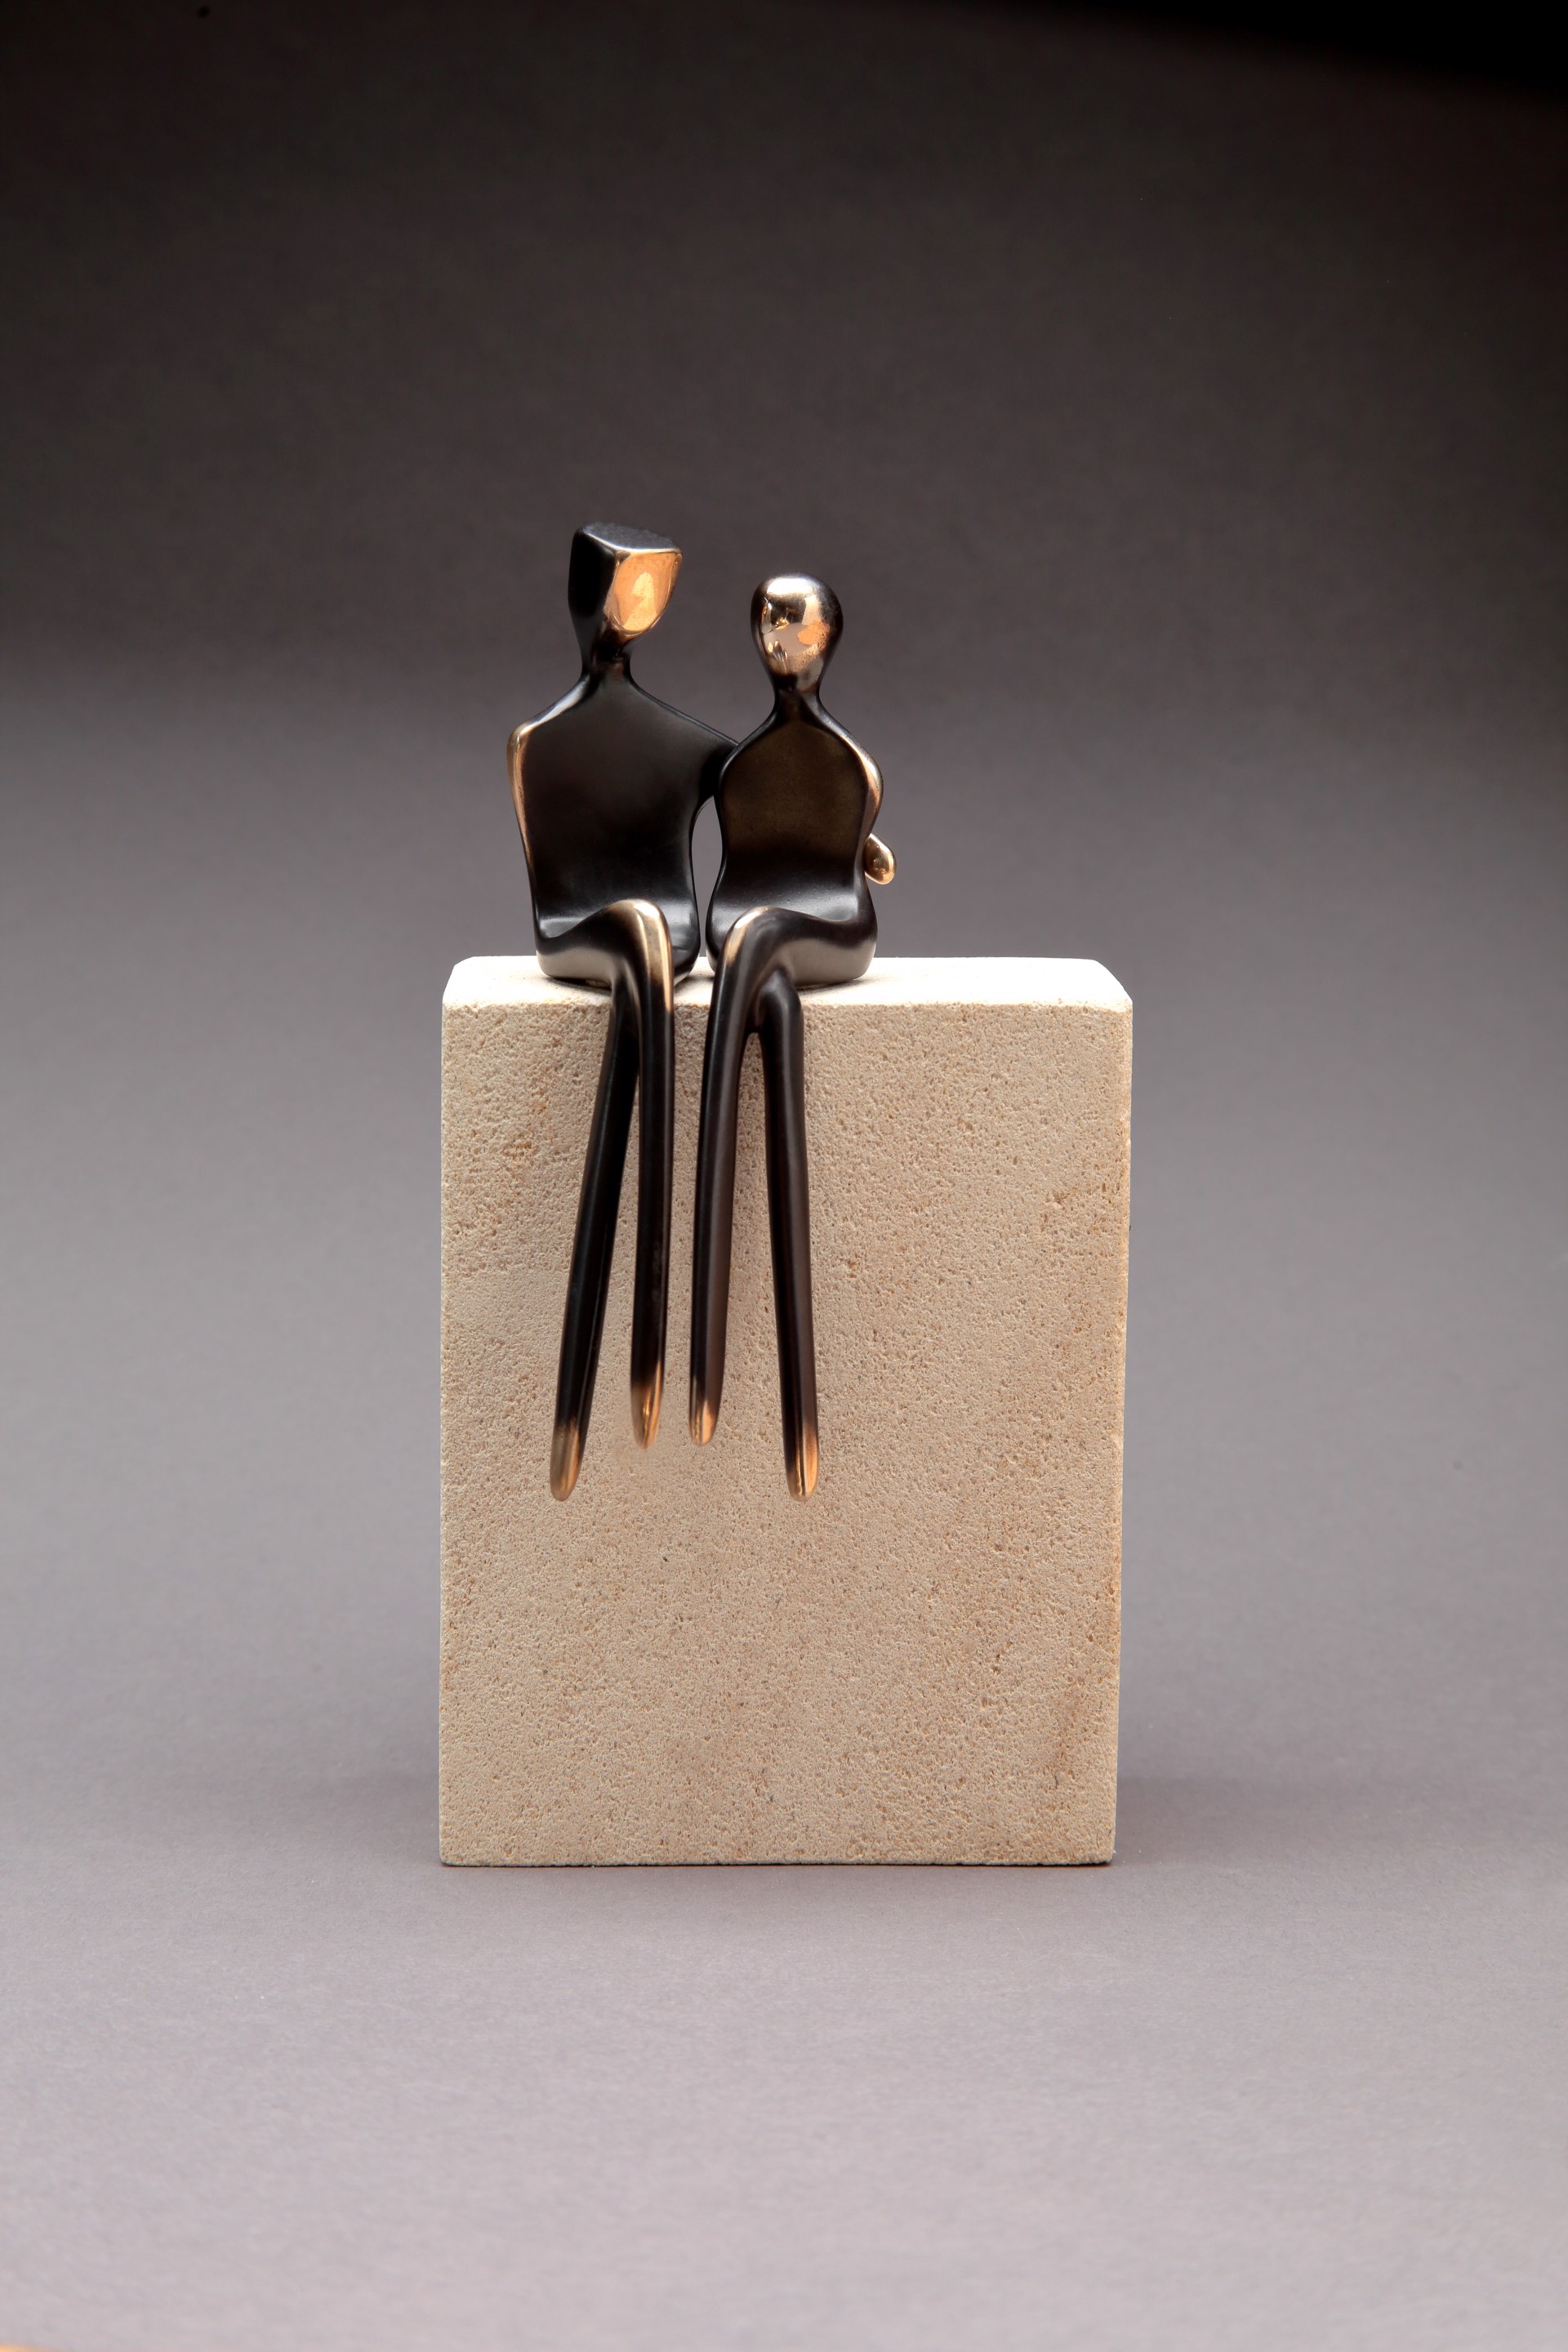 Caress ~ Mounted on Tan Limestone by Yenny Cocq